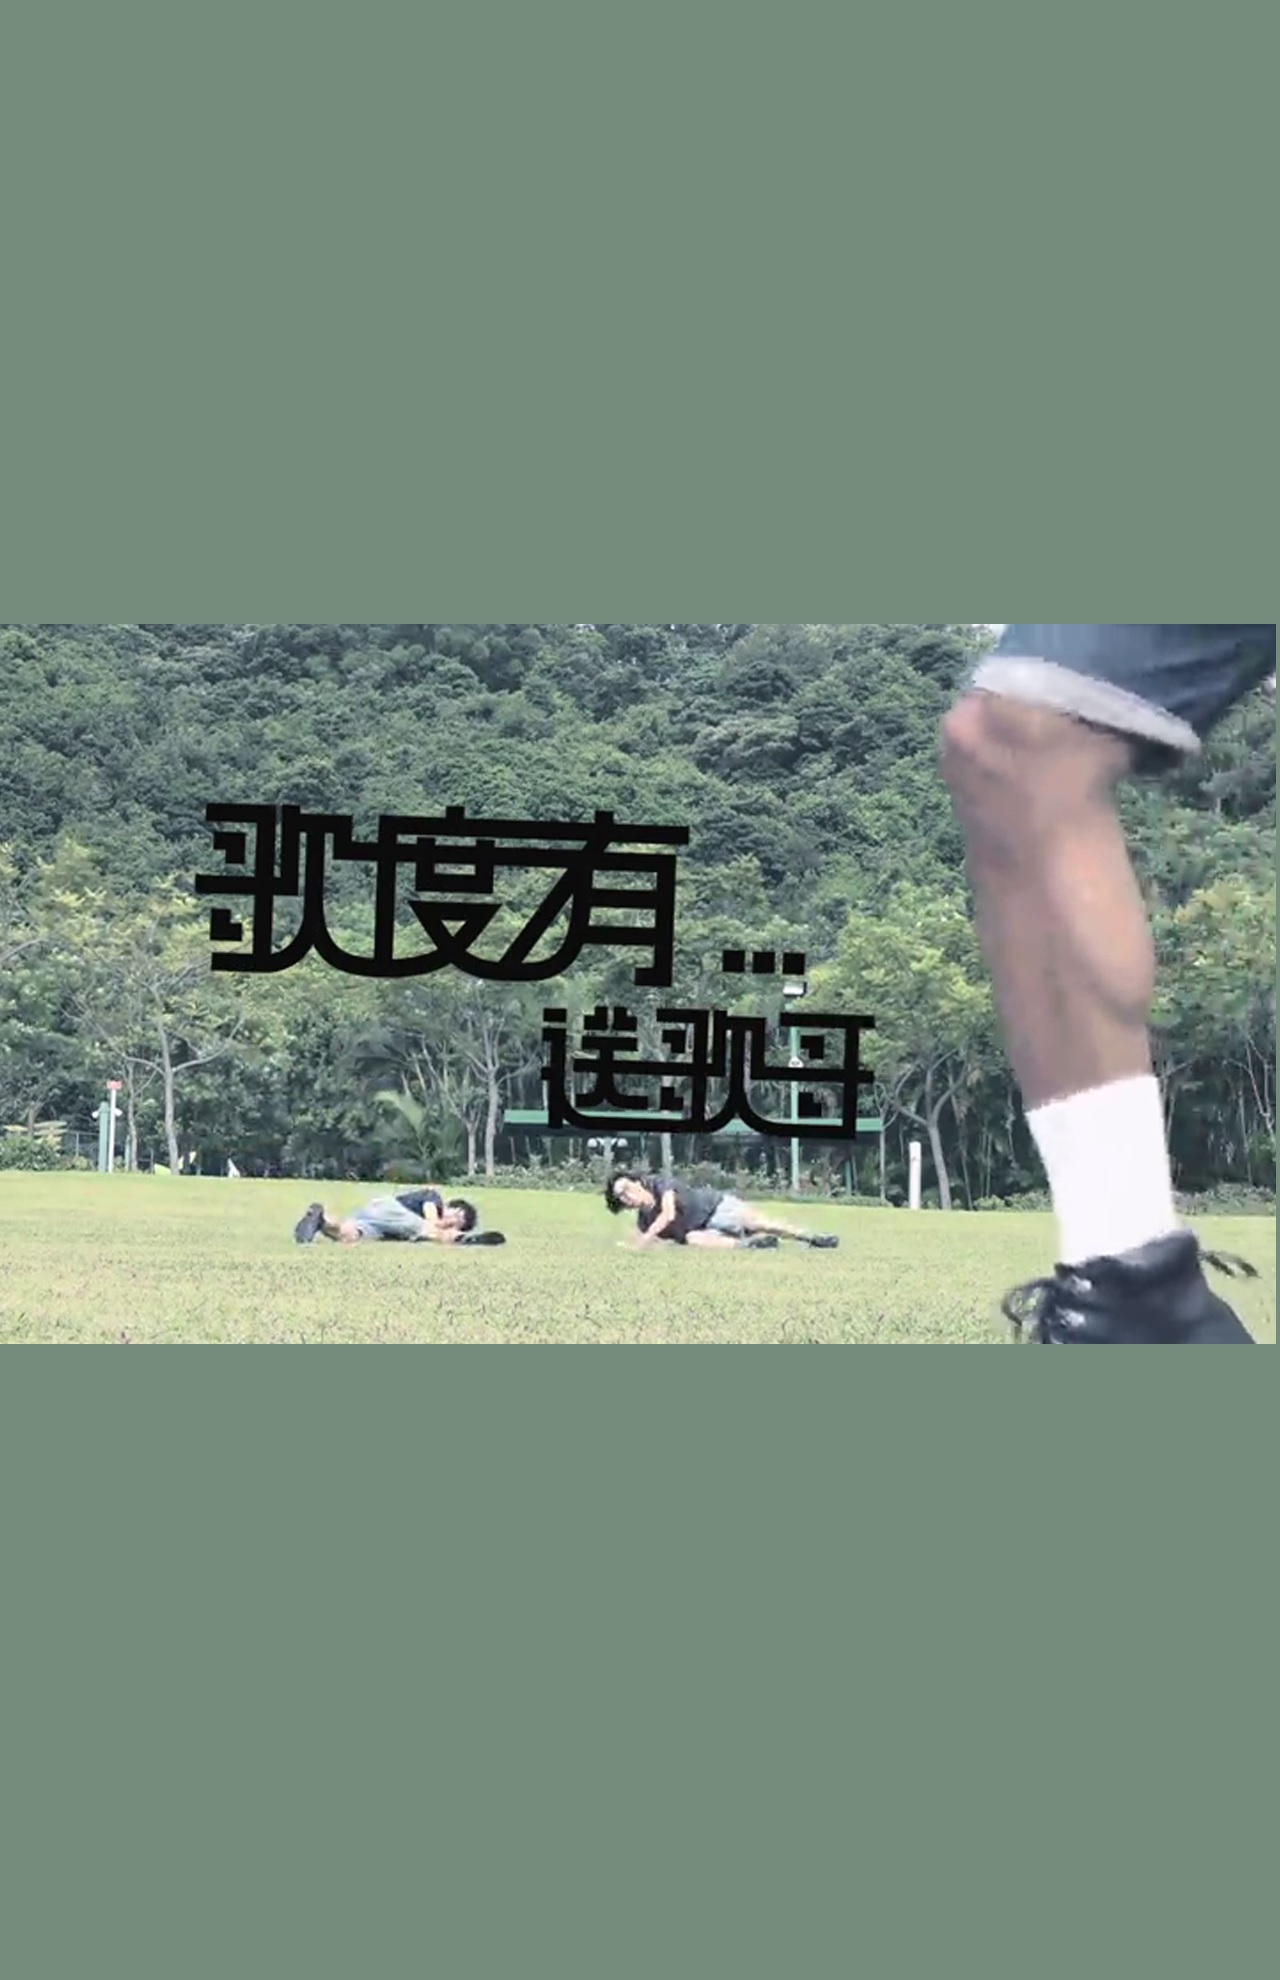 From the song: By New Youth Barbra Shop - 歌度有...送歌哥